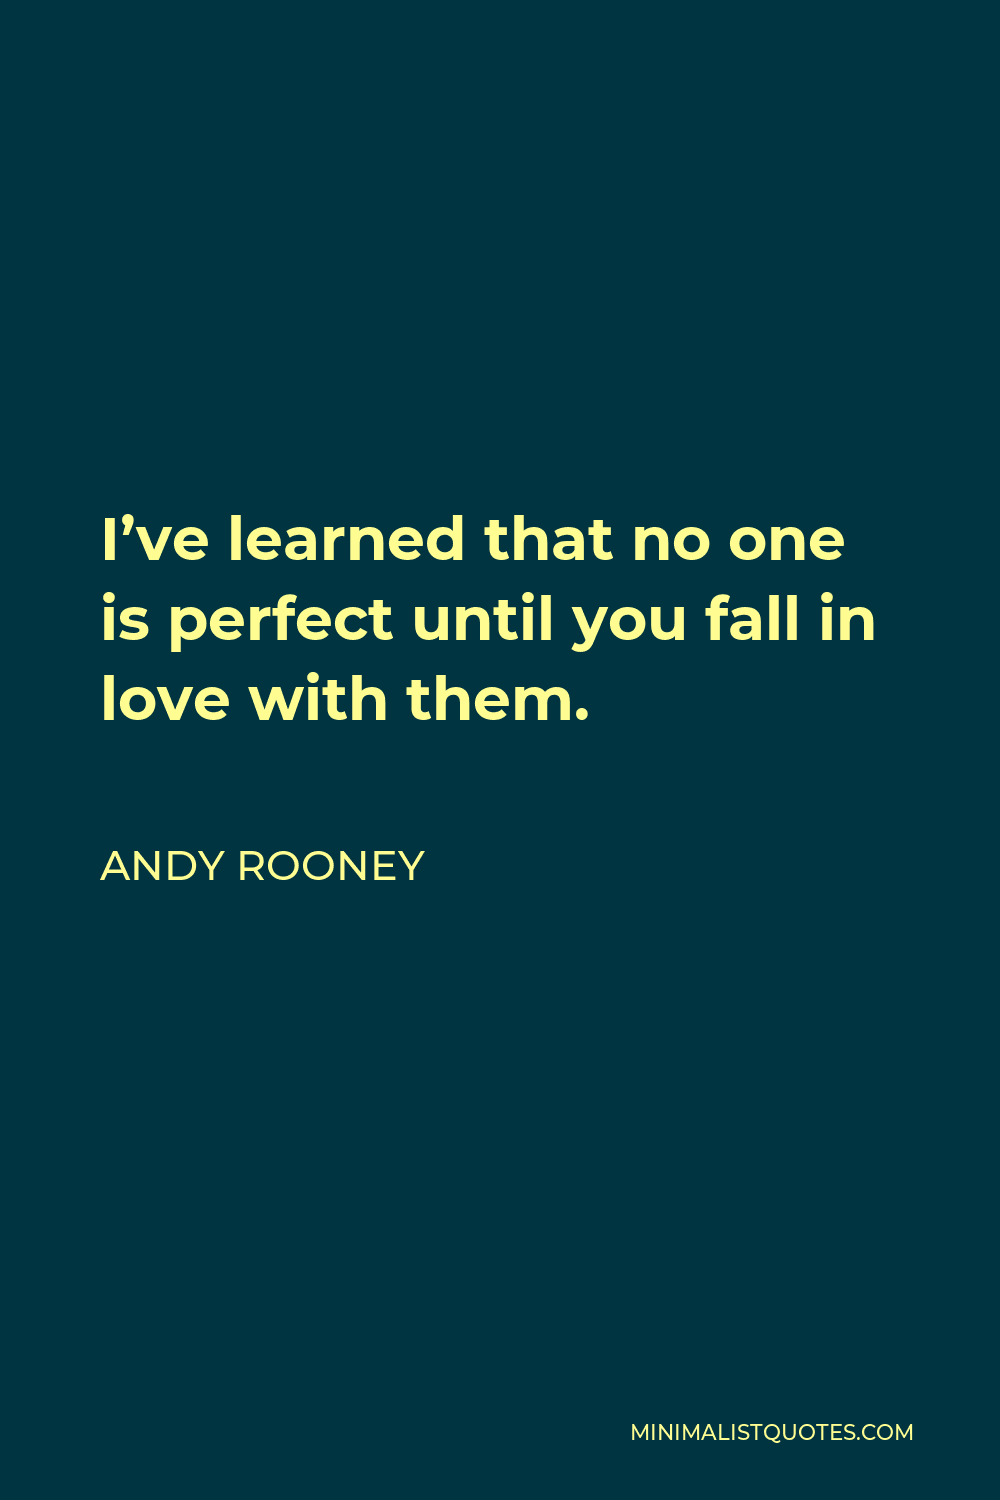 Andy Rooney Quote - I’ve learned that no one is perfect until you fall in love with them.